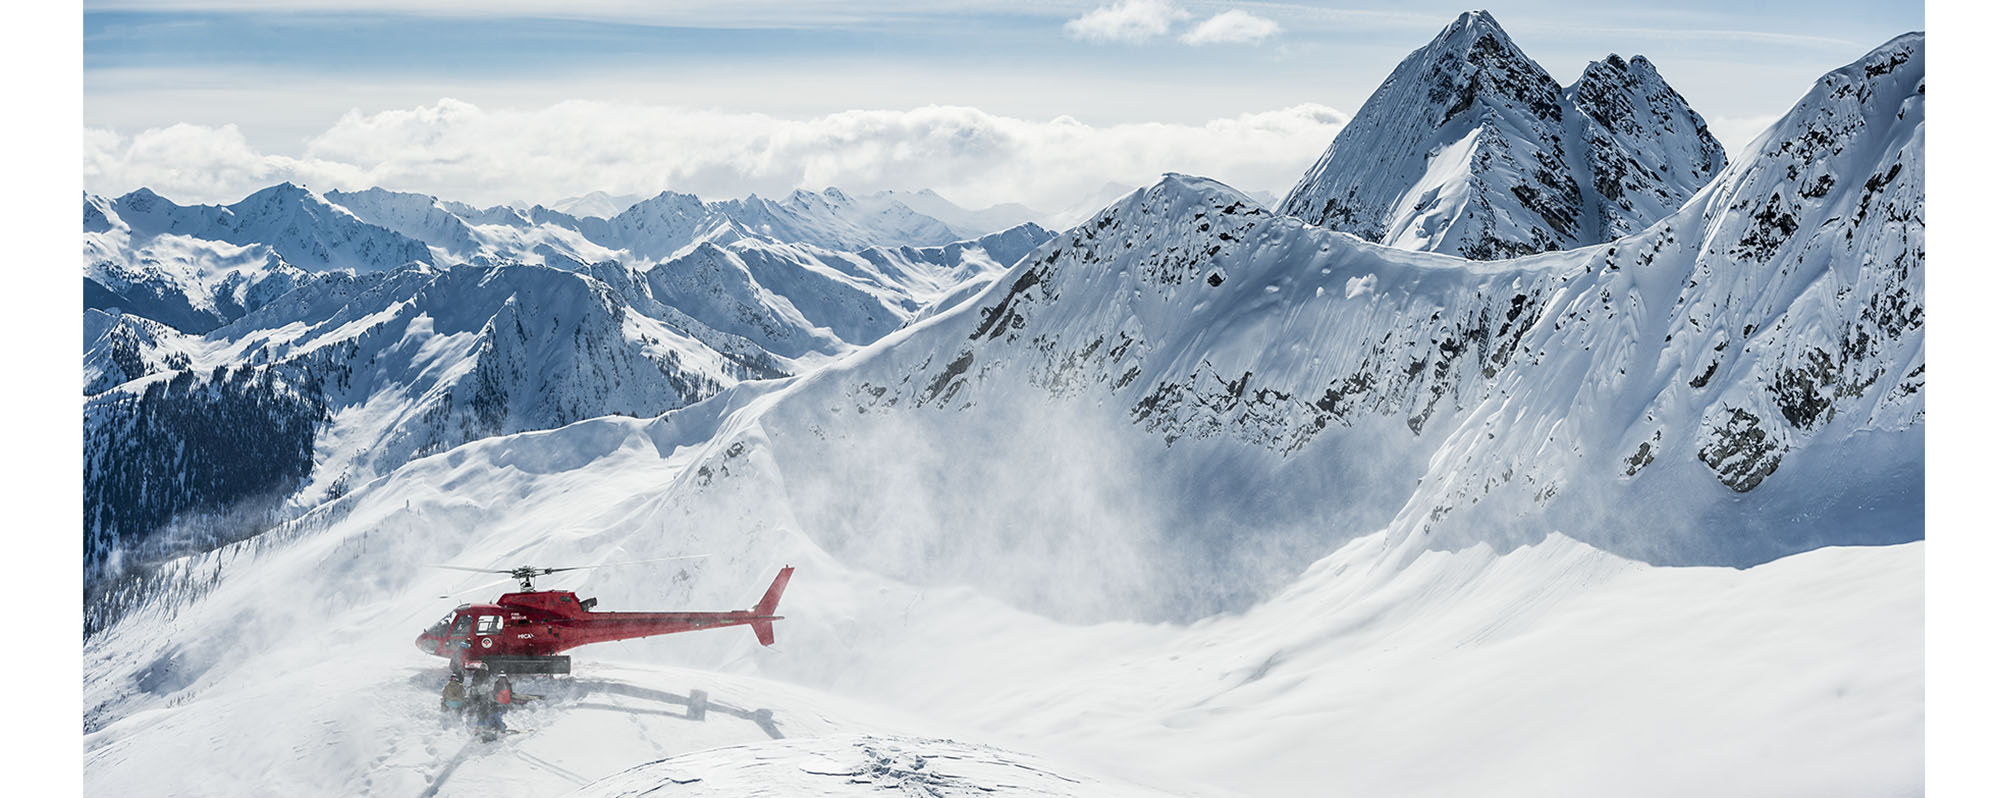 A red helicopter lands in a snowy mountain range in British Columbia